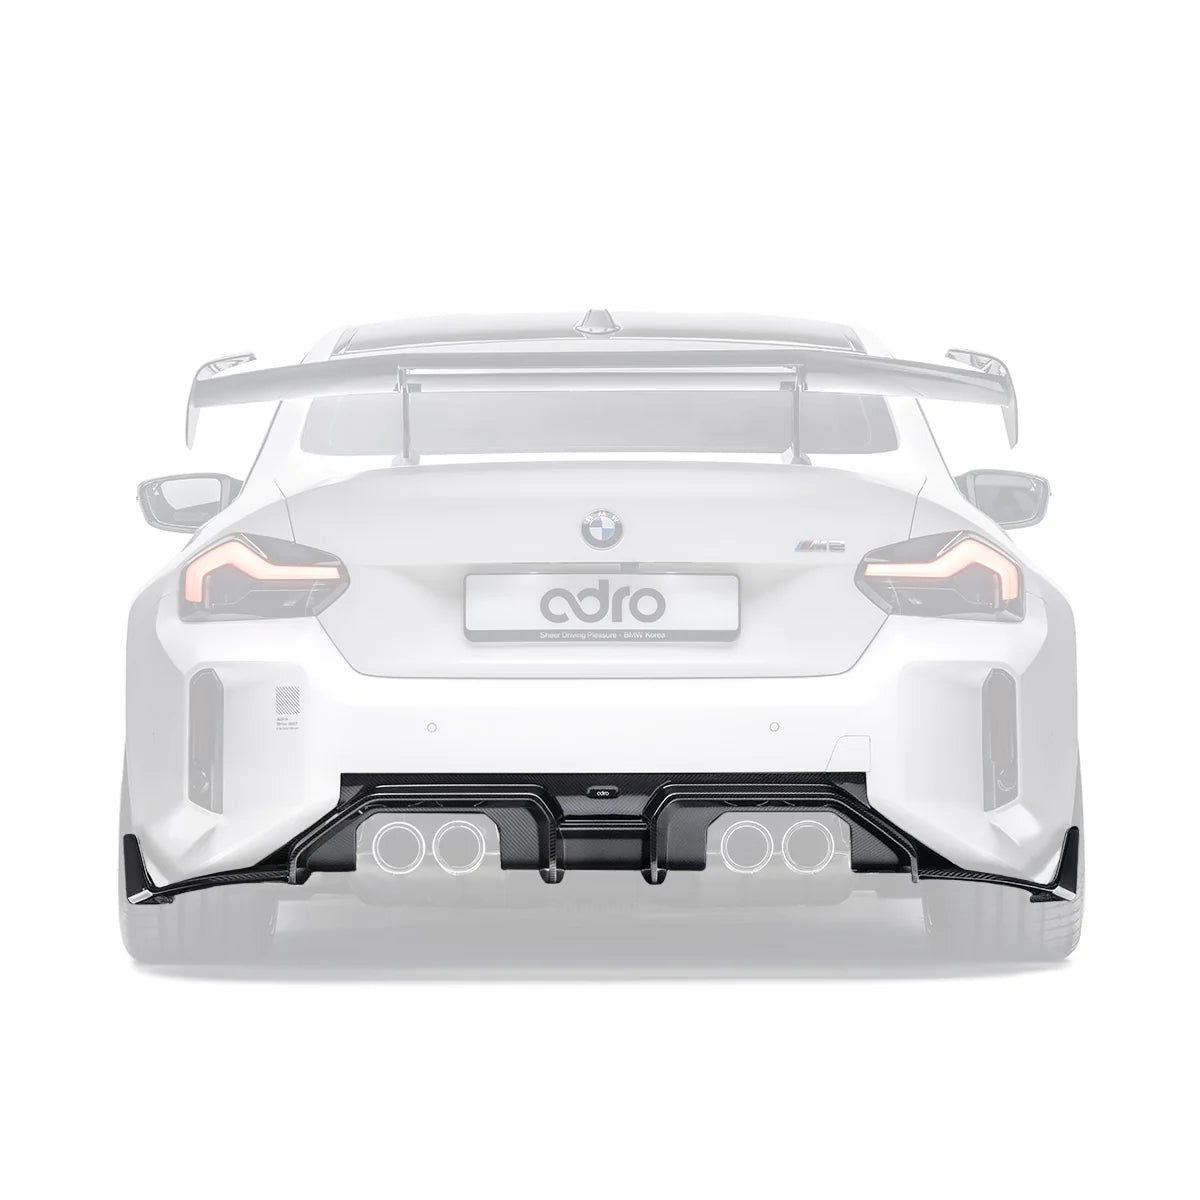 ADRO BMW G87 M2 REAR DIFFUSER - PREORDER NOW!